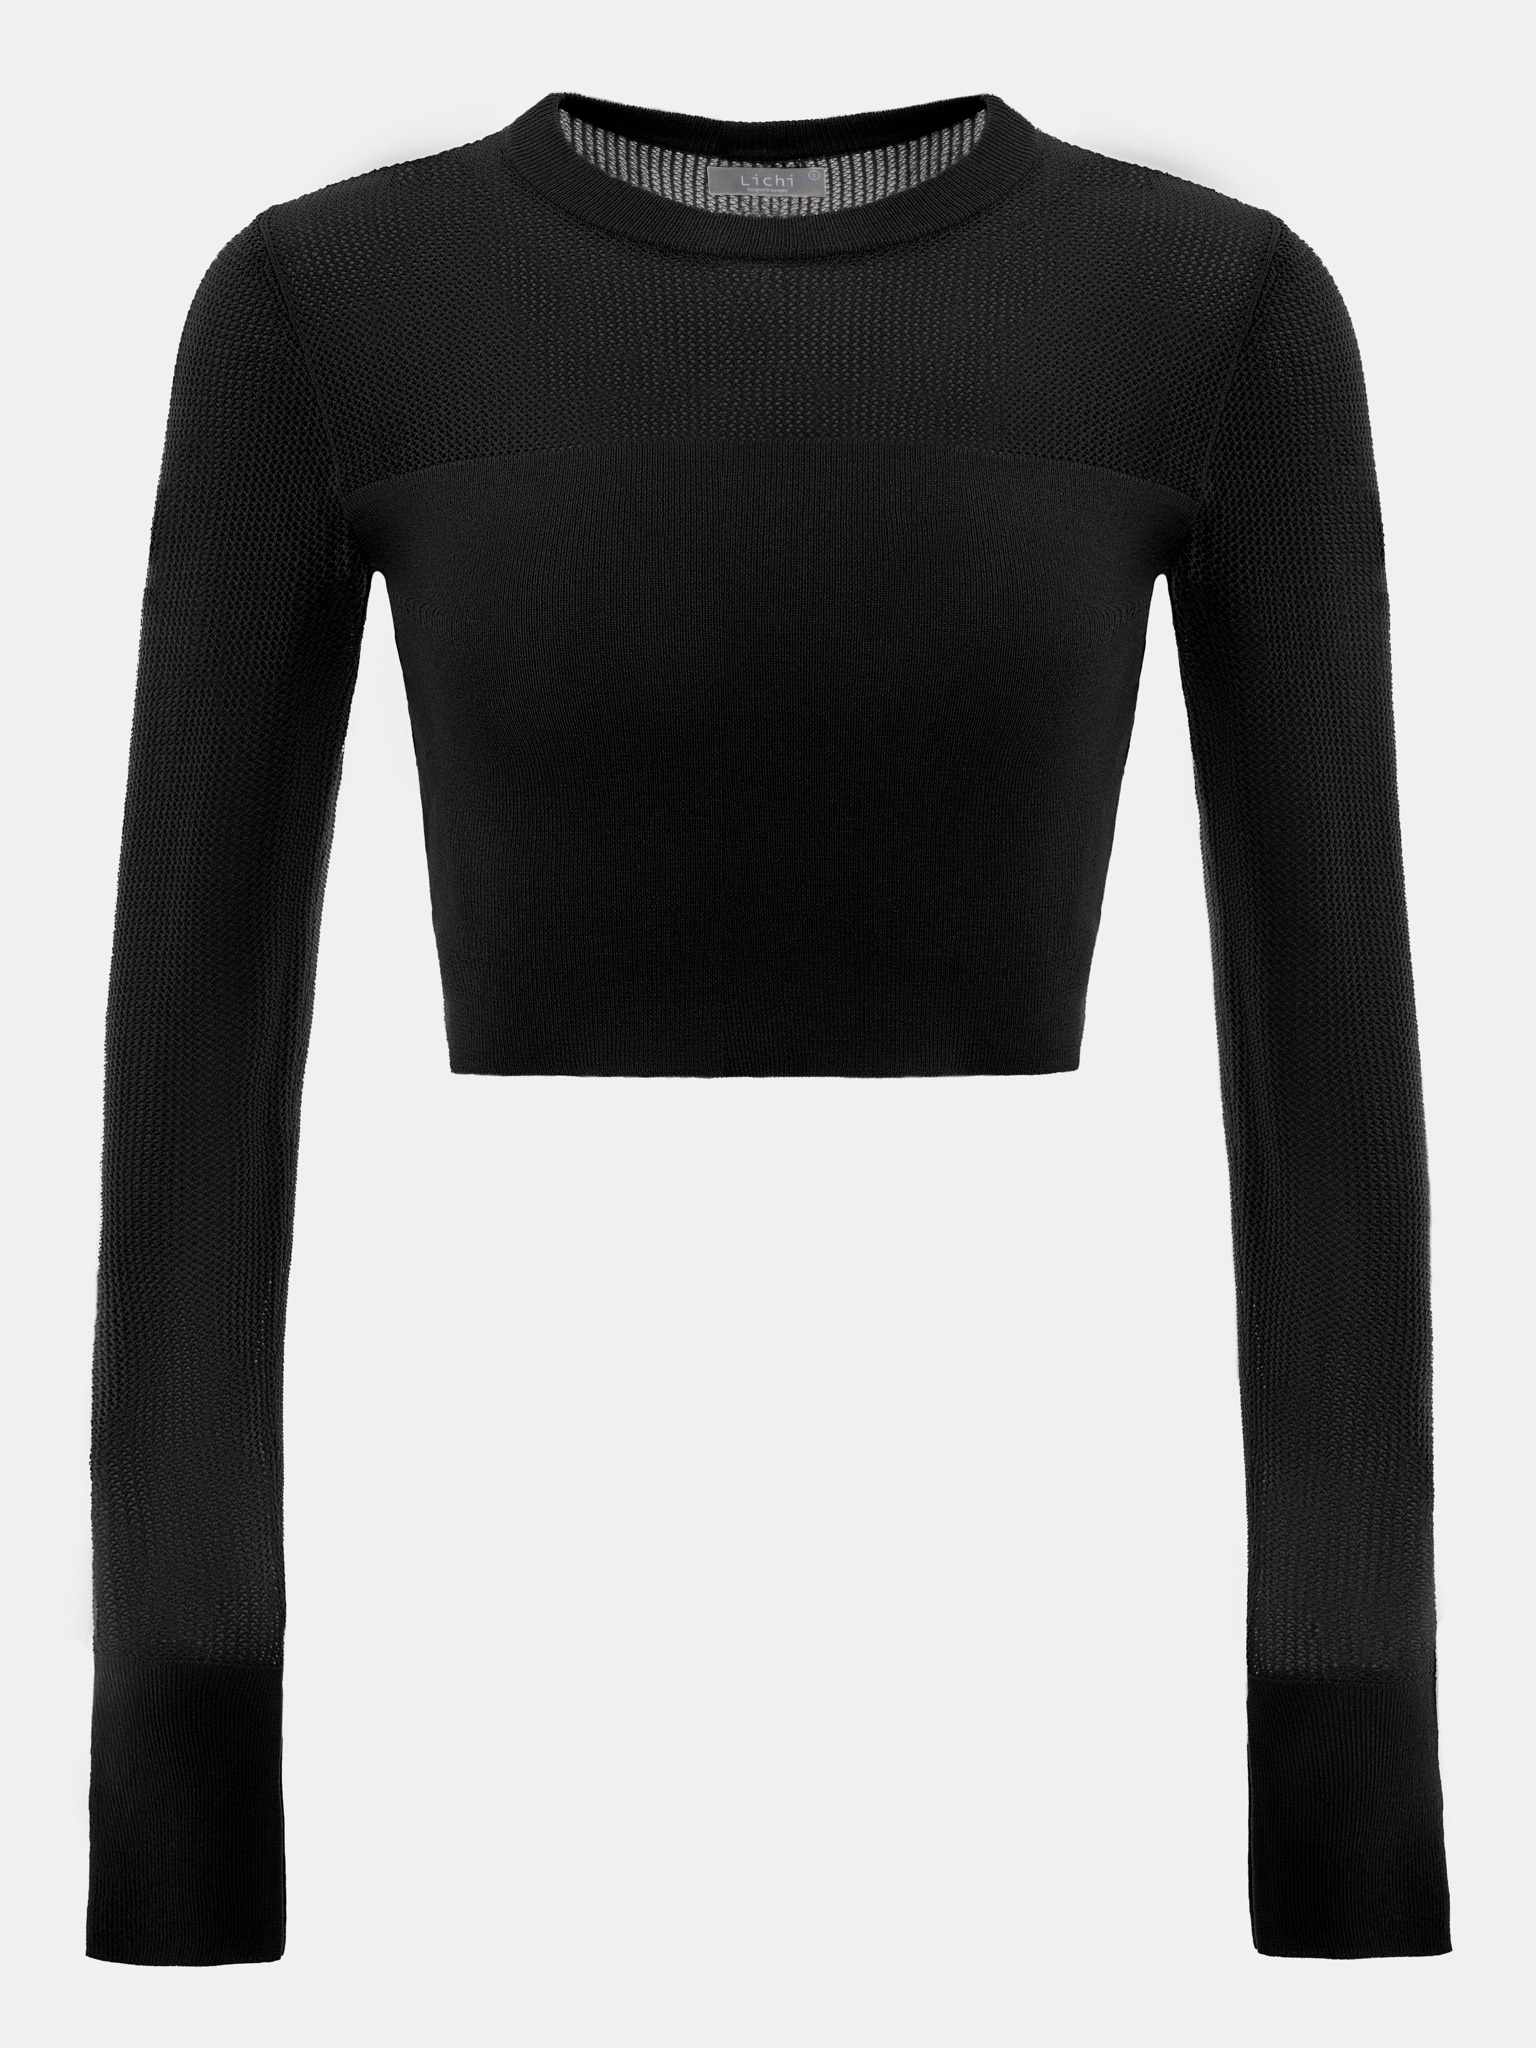 Knit cropped top of mixed yarn :: LICHI - Online fashion store